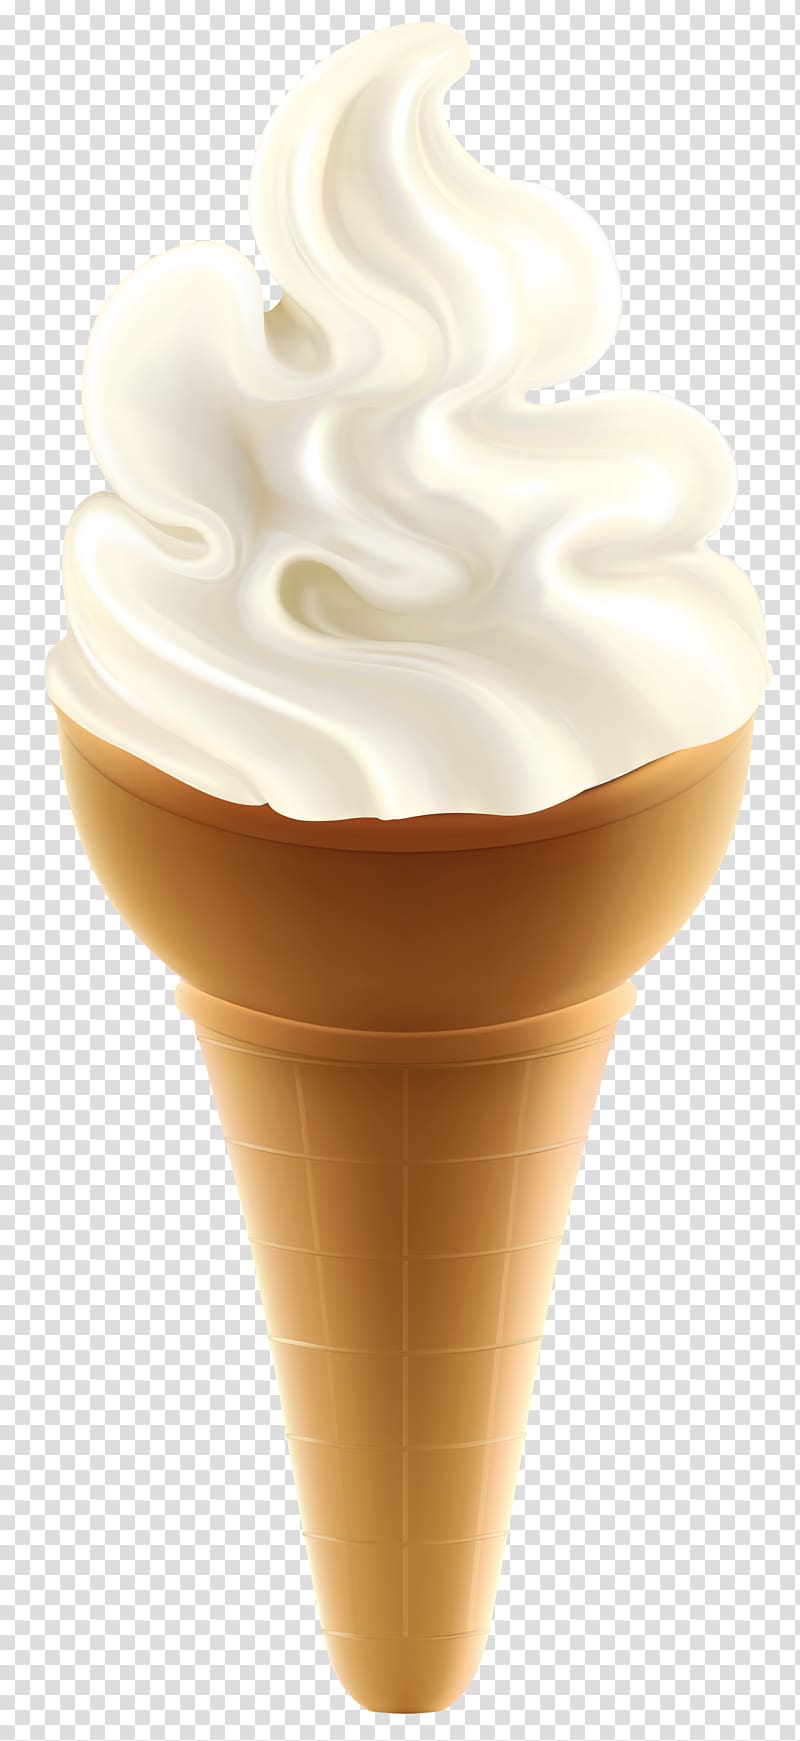 vanilla ice cream with cone illustration, Ice cream cone Sundae Chocolate ice cream, Ice Cream Cone transparent background PNG clipart